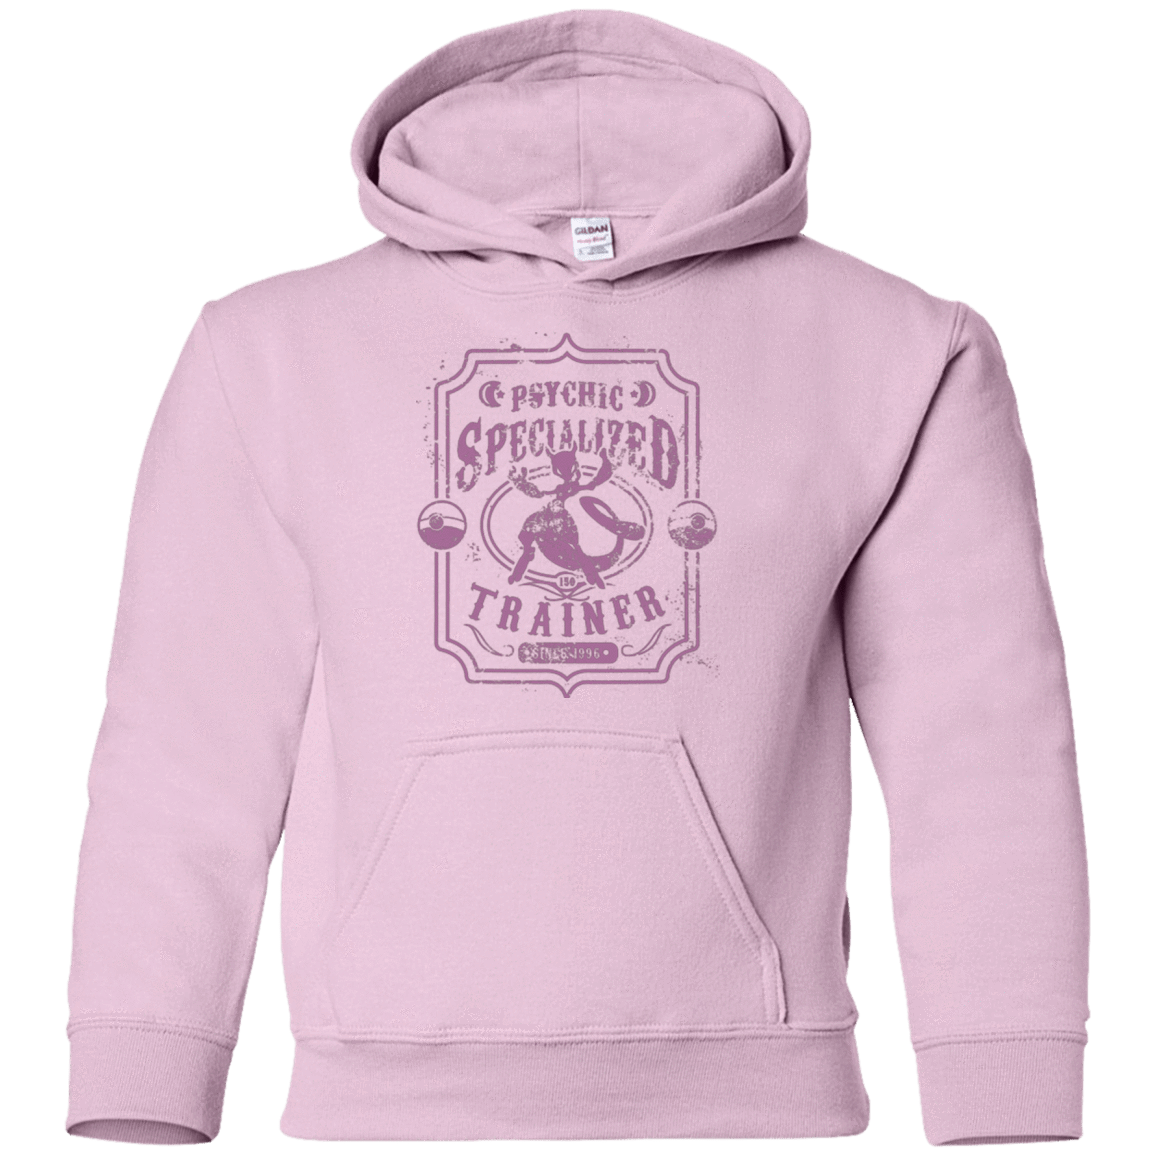 Sweatshirts Light Pink / YS Psychic Specialized Trainer 2 Youth Hoodie